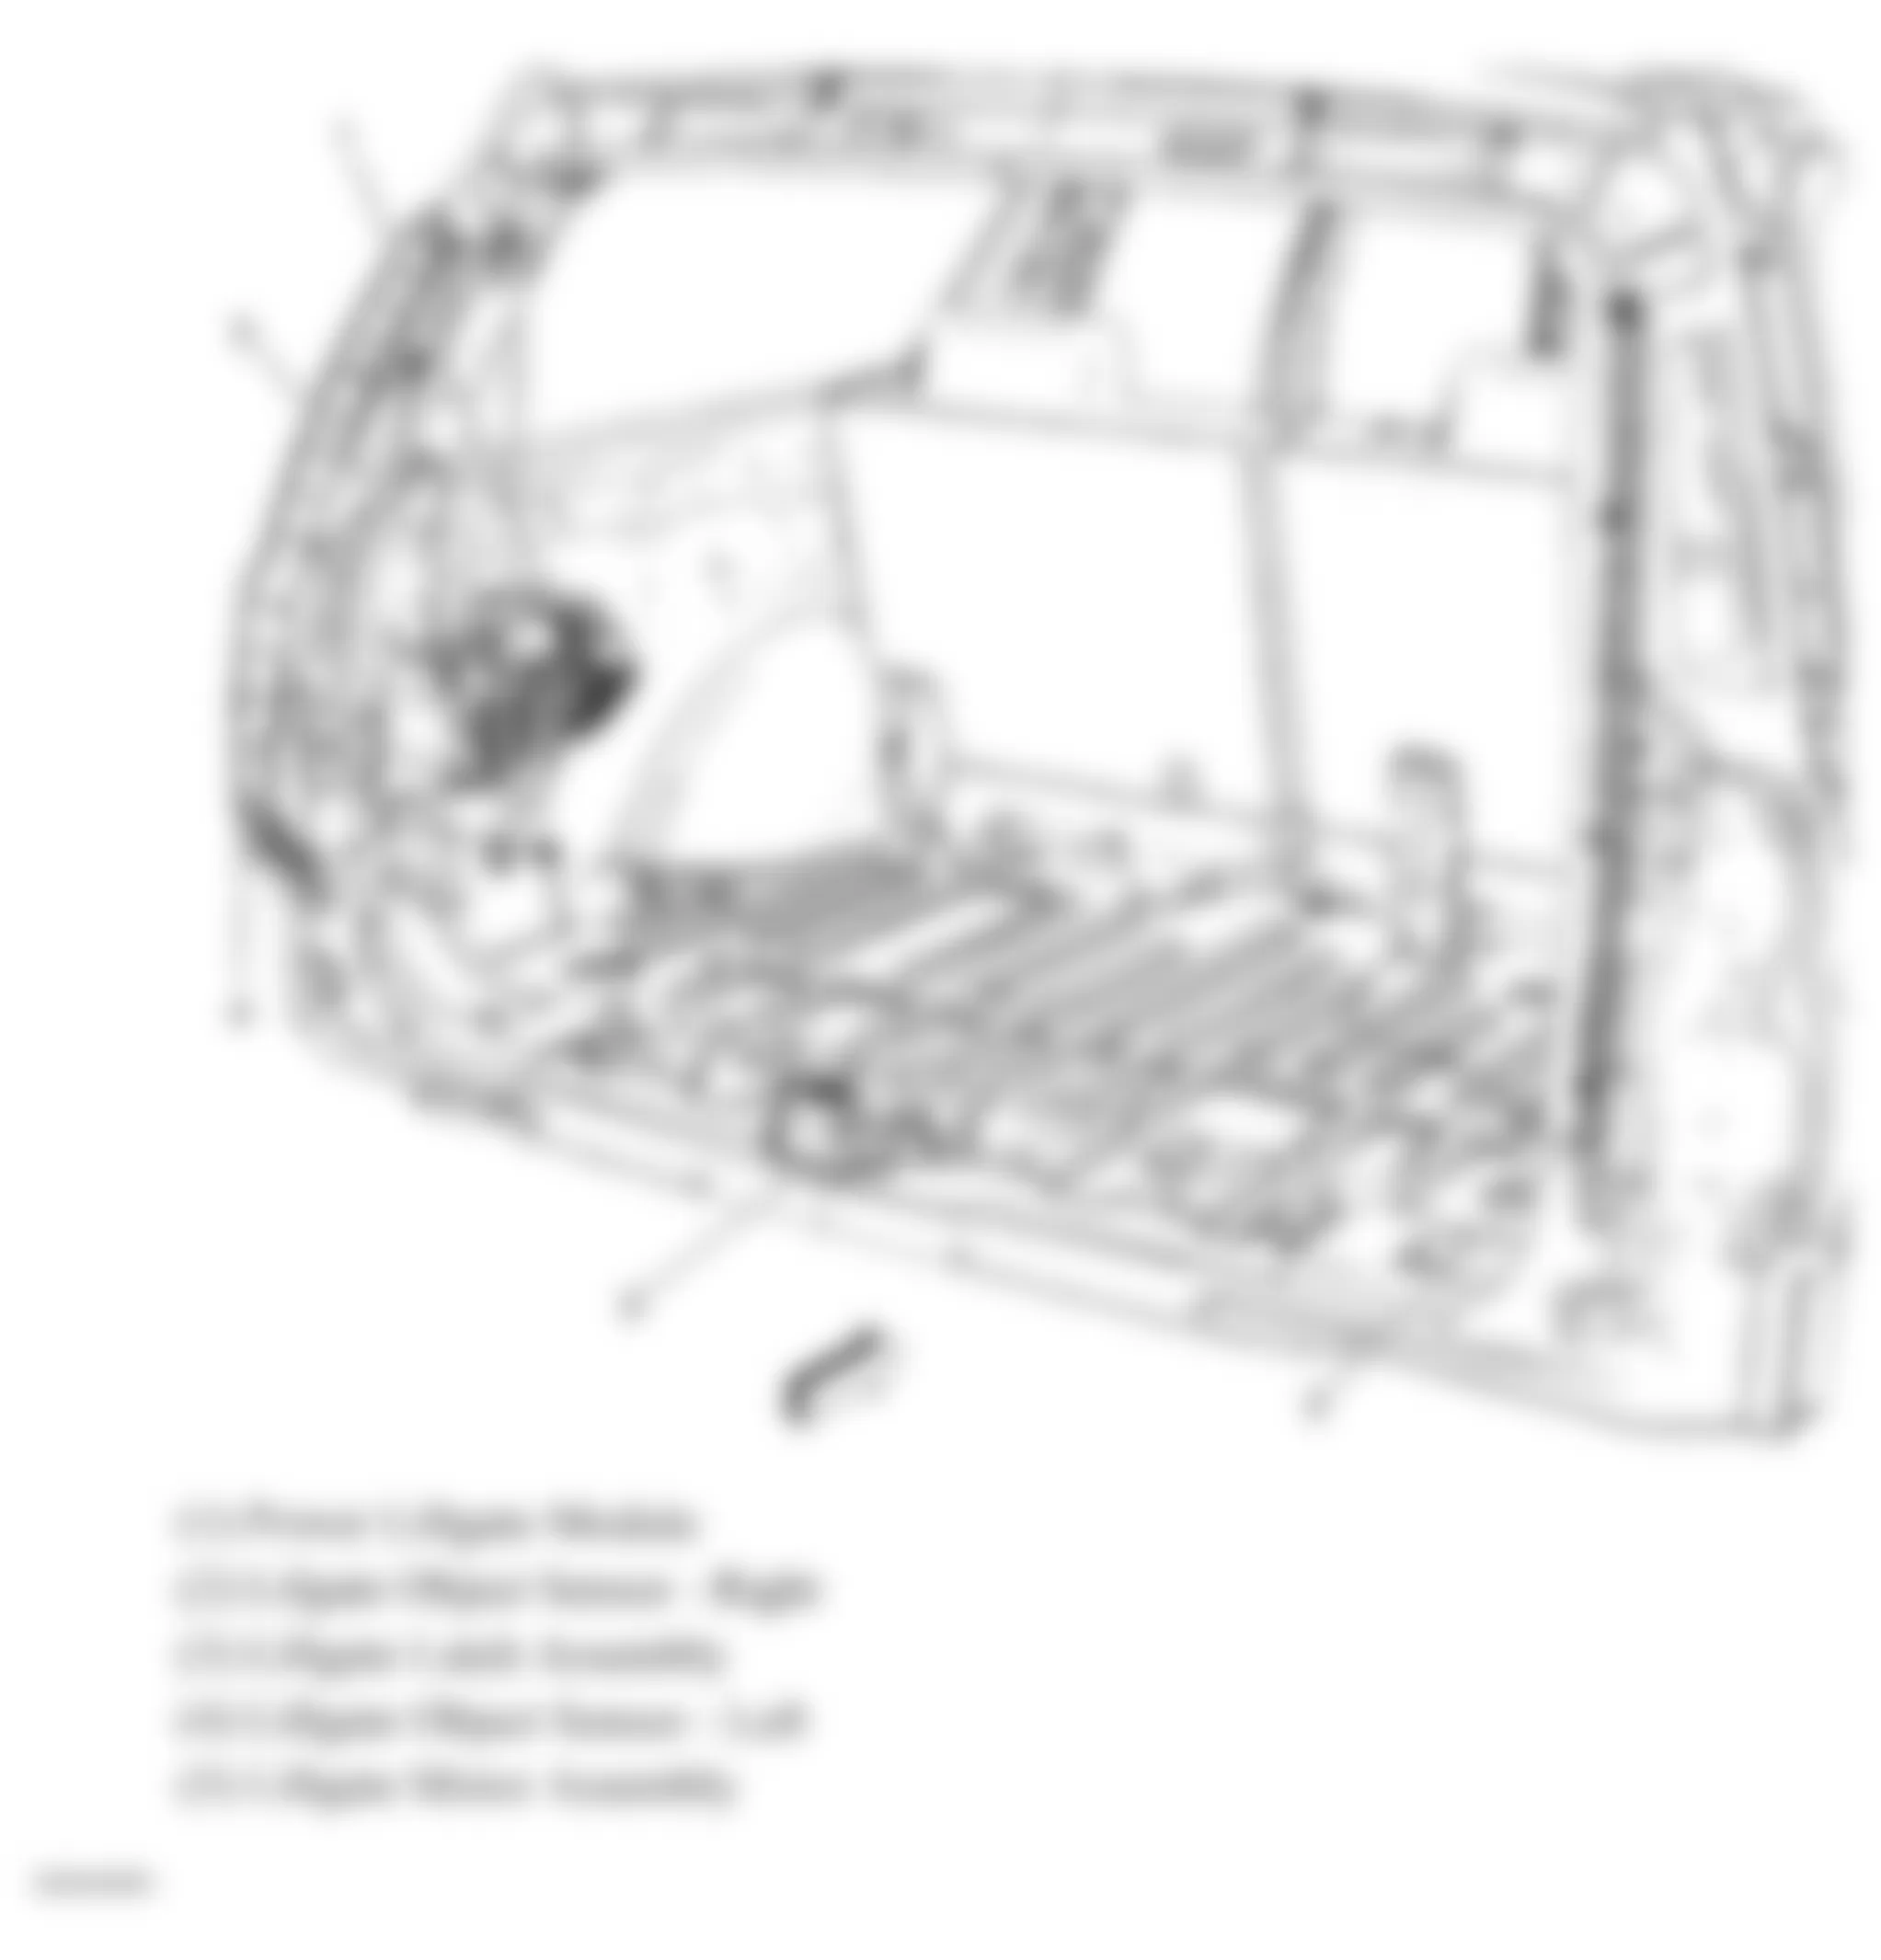 Chevrolet Suburban C1500 2009 - Component Locations -  Rear Of Vehicle